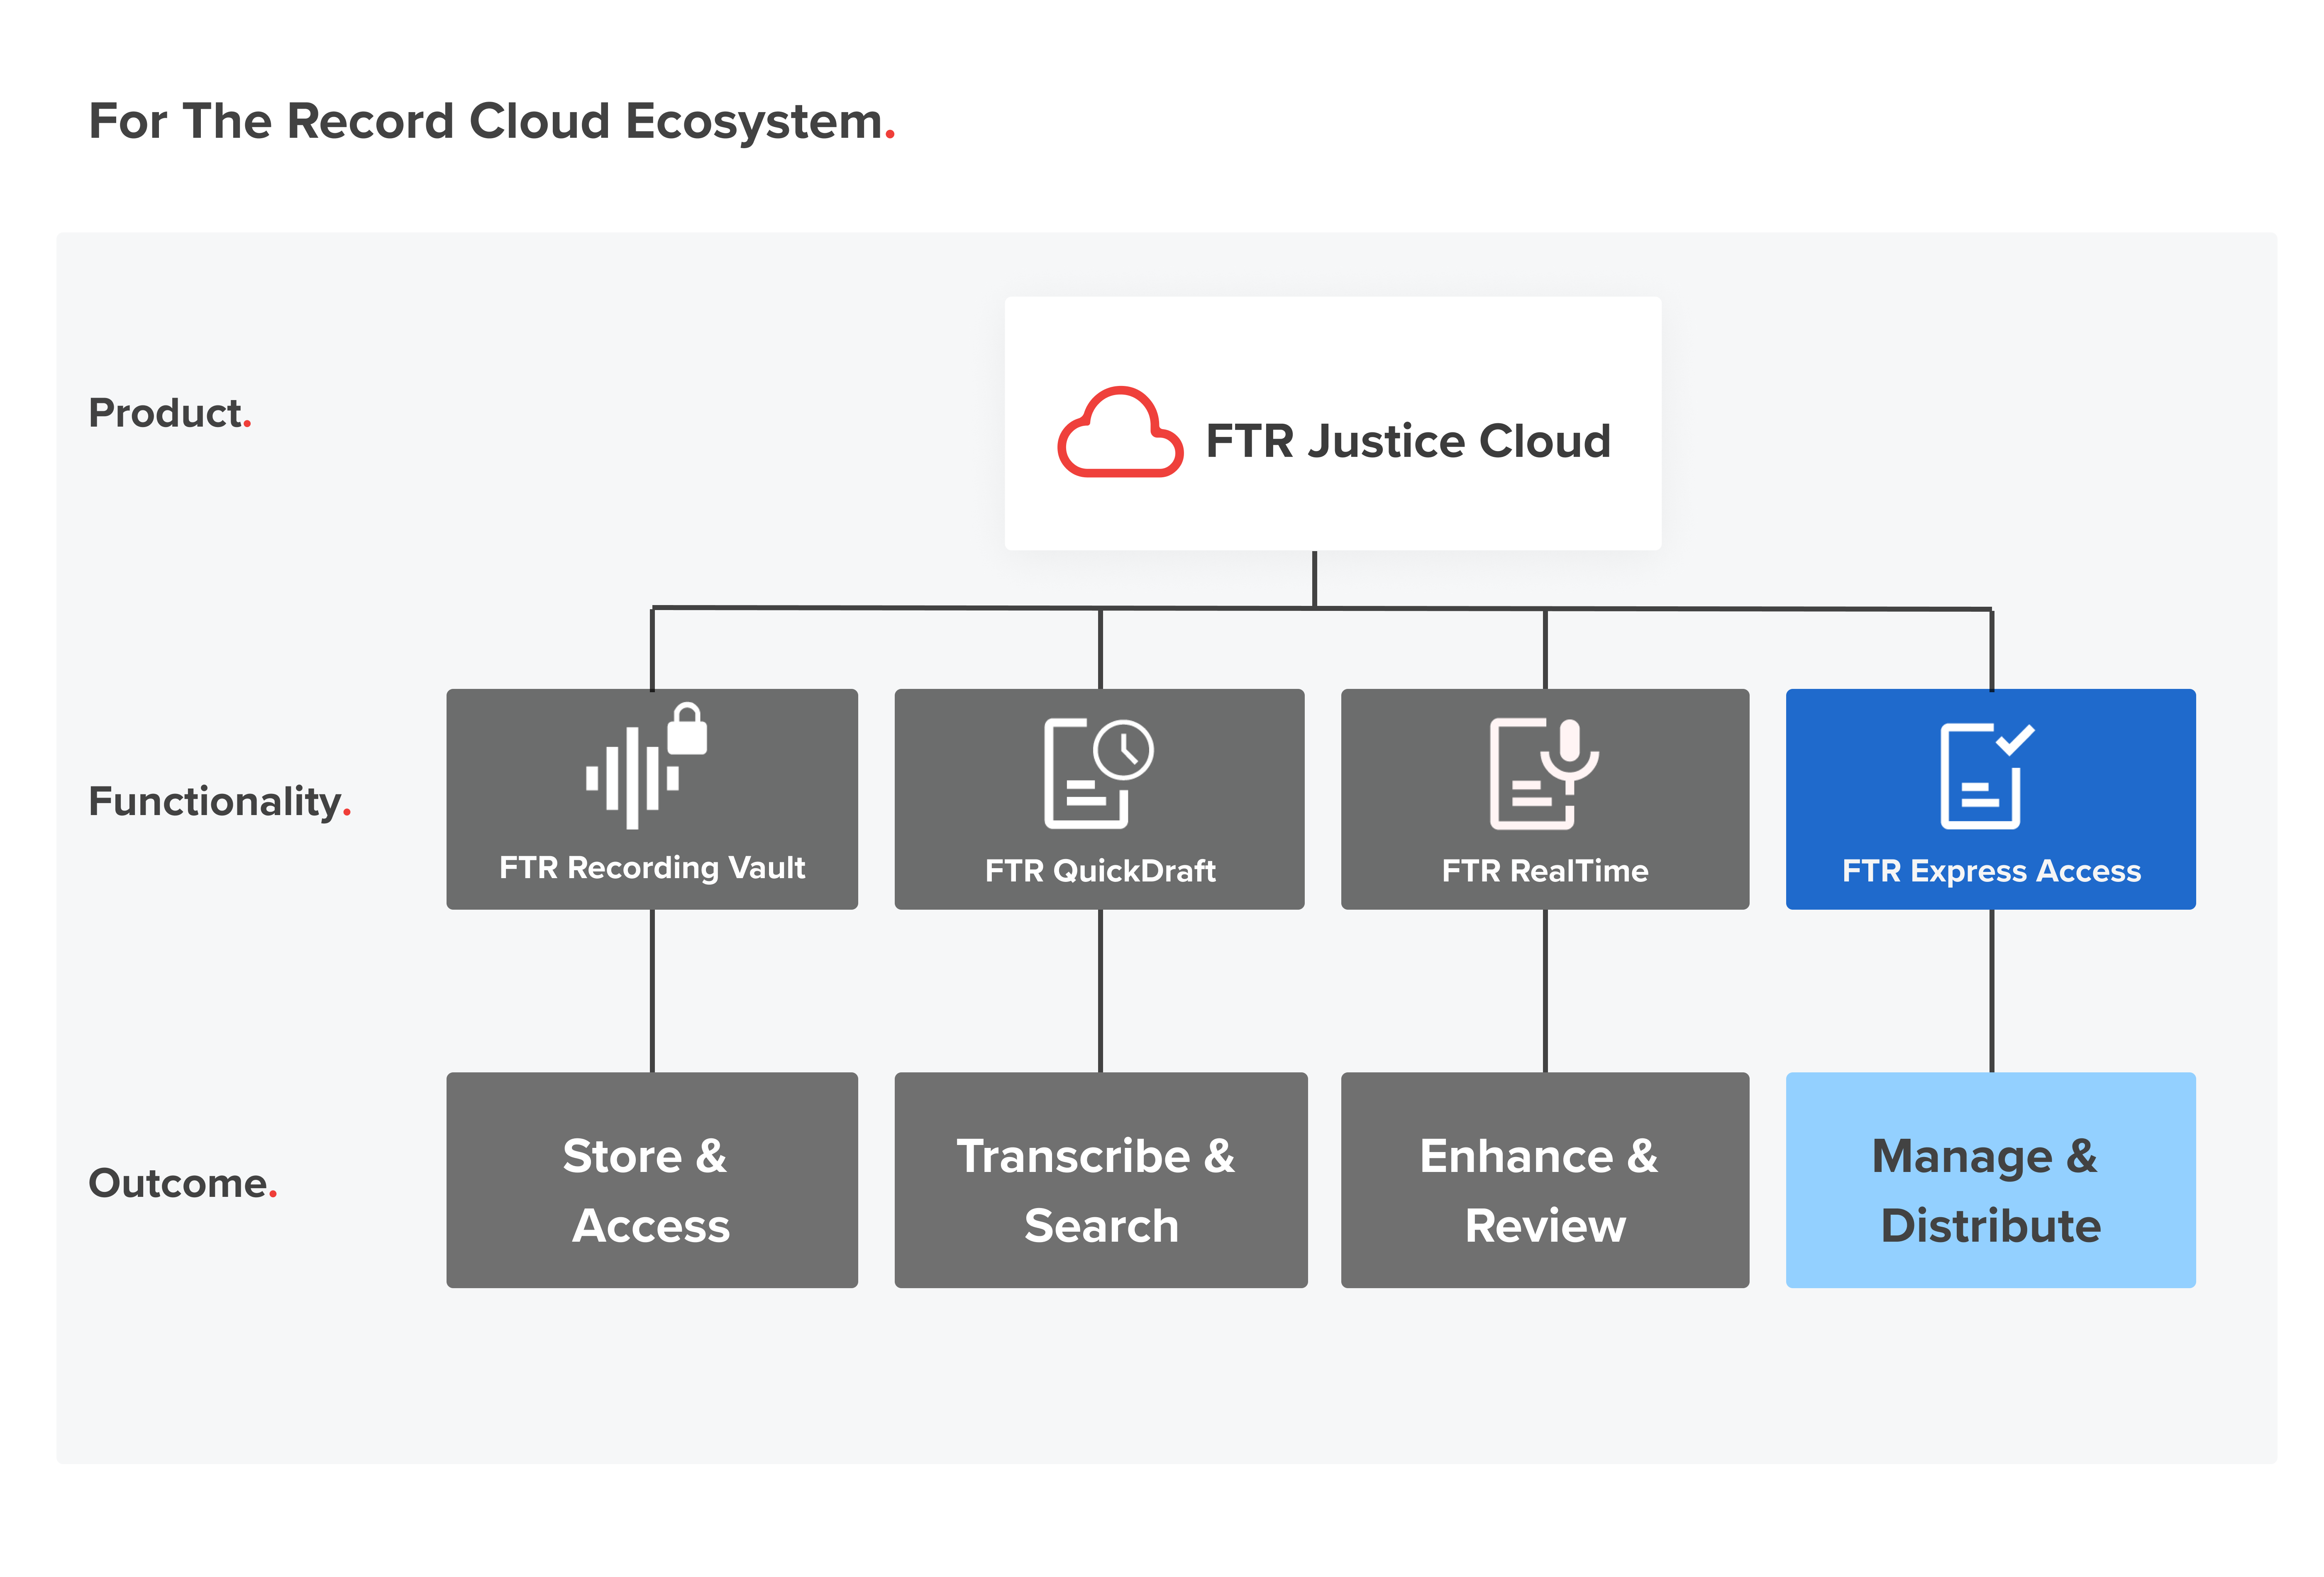 For The Record's Cloud Ecosystem, highlighting FTR Express Access